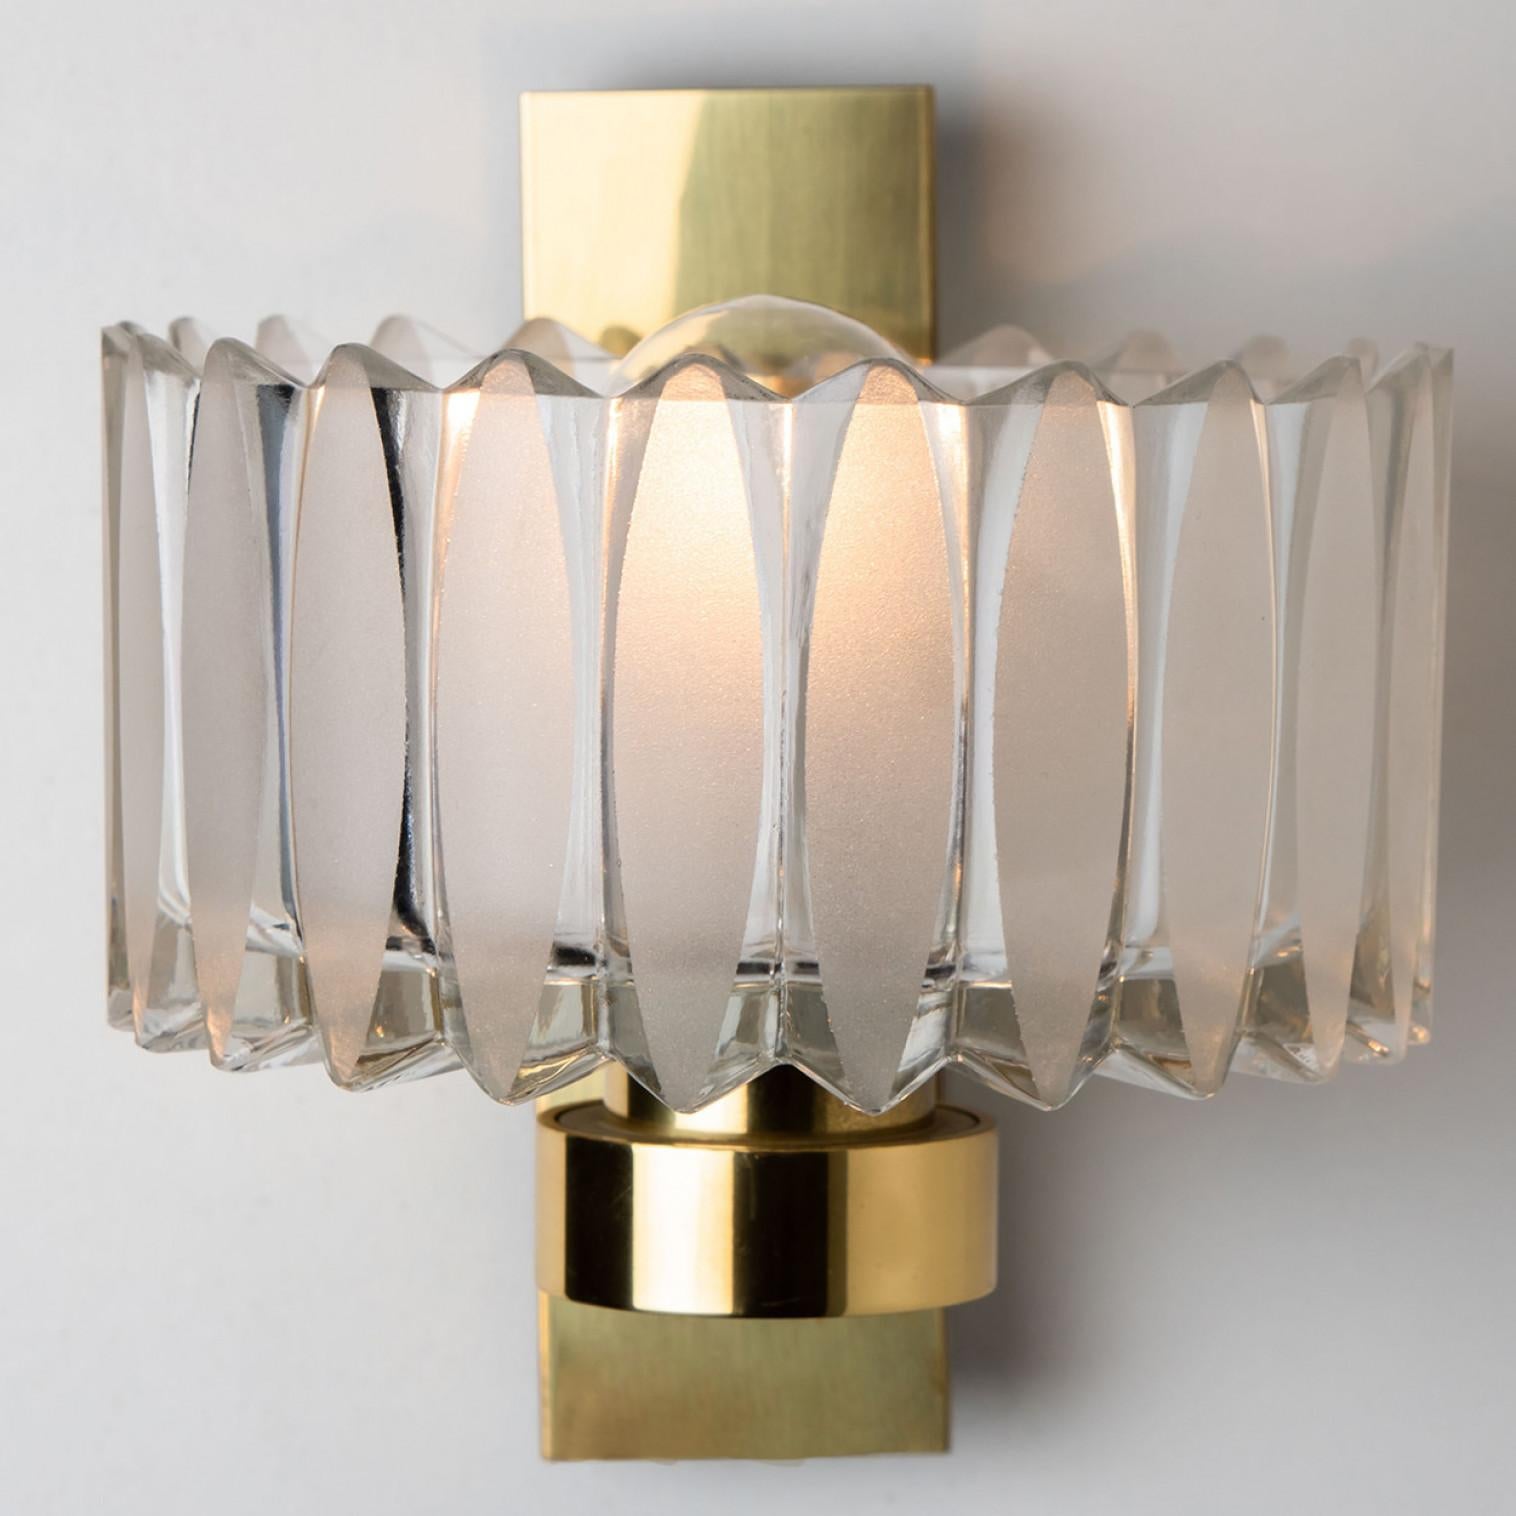 Pair of Hillebrand Brass and Glass Wall Light Fixtures, 1970s For Sale 3